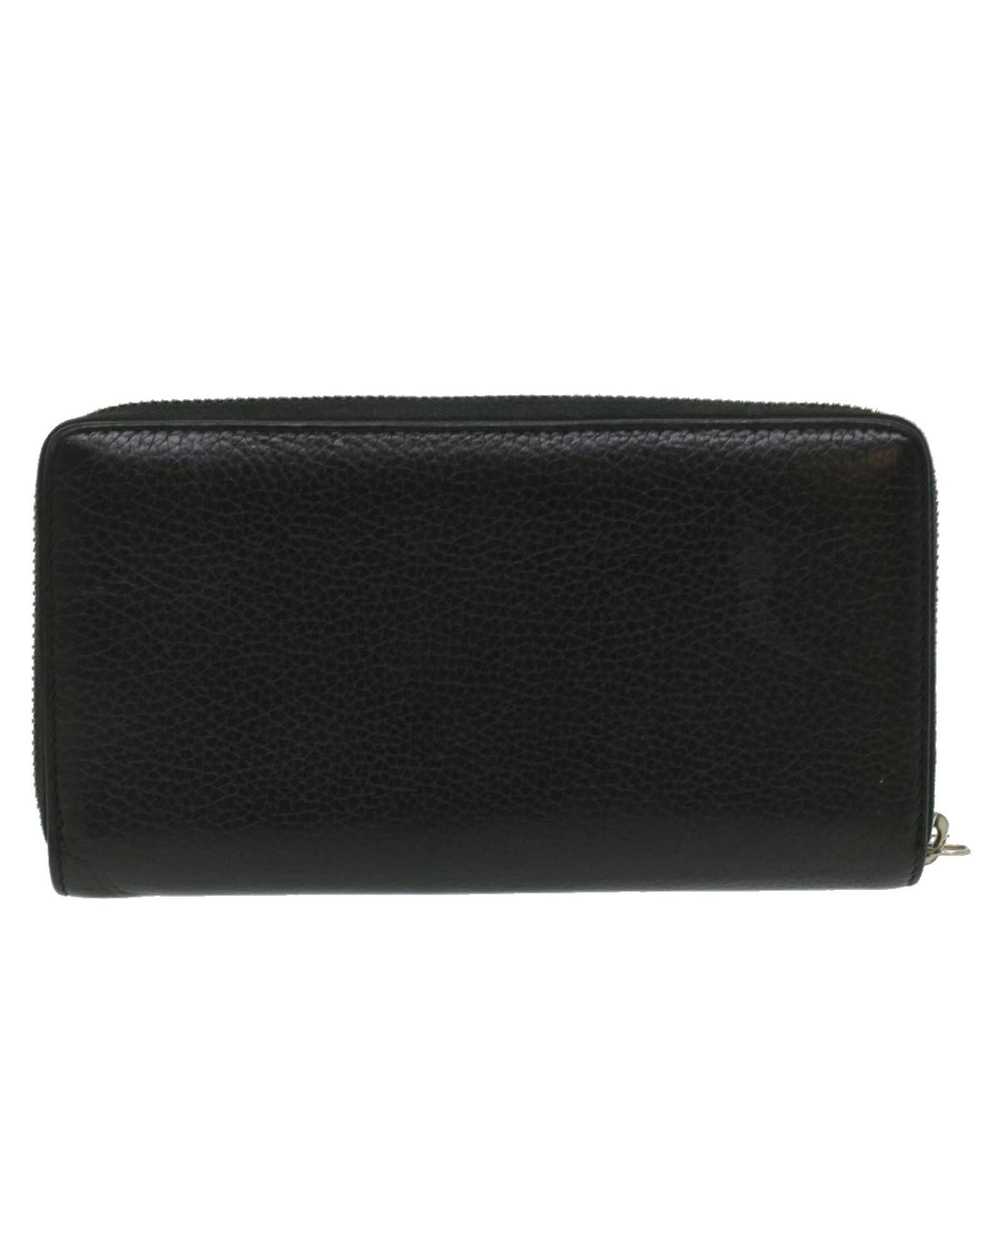 Gucci Black Leather Long Wallet by Gucci 473928 - image 2